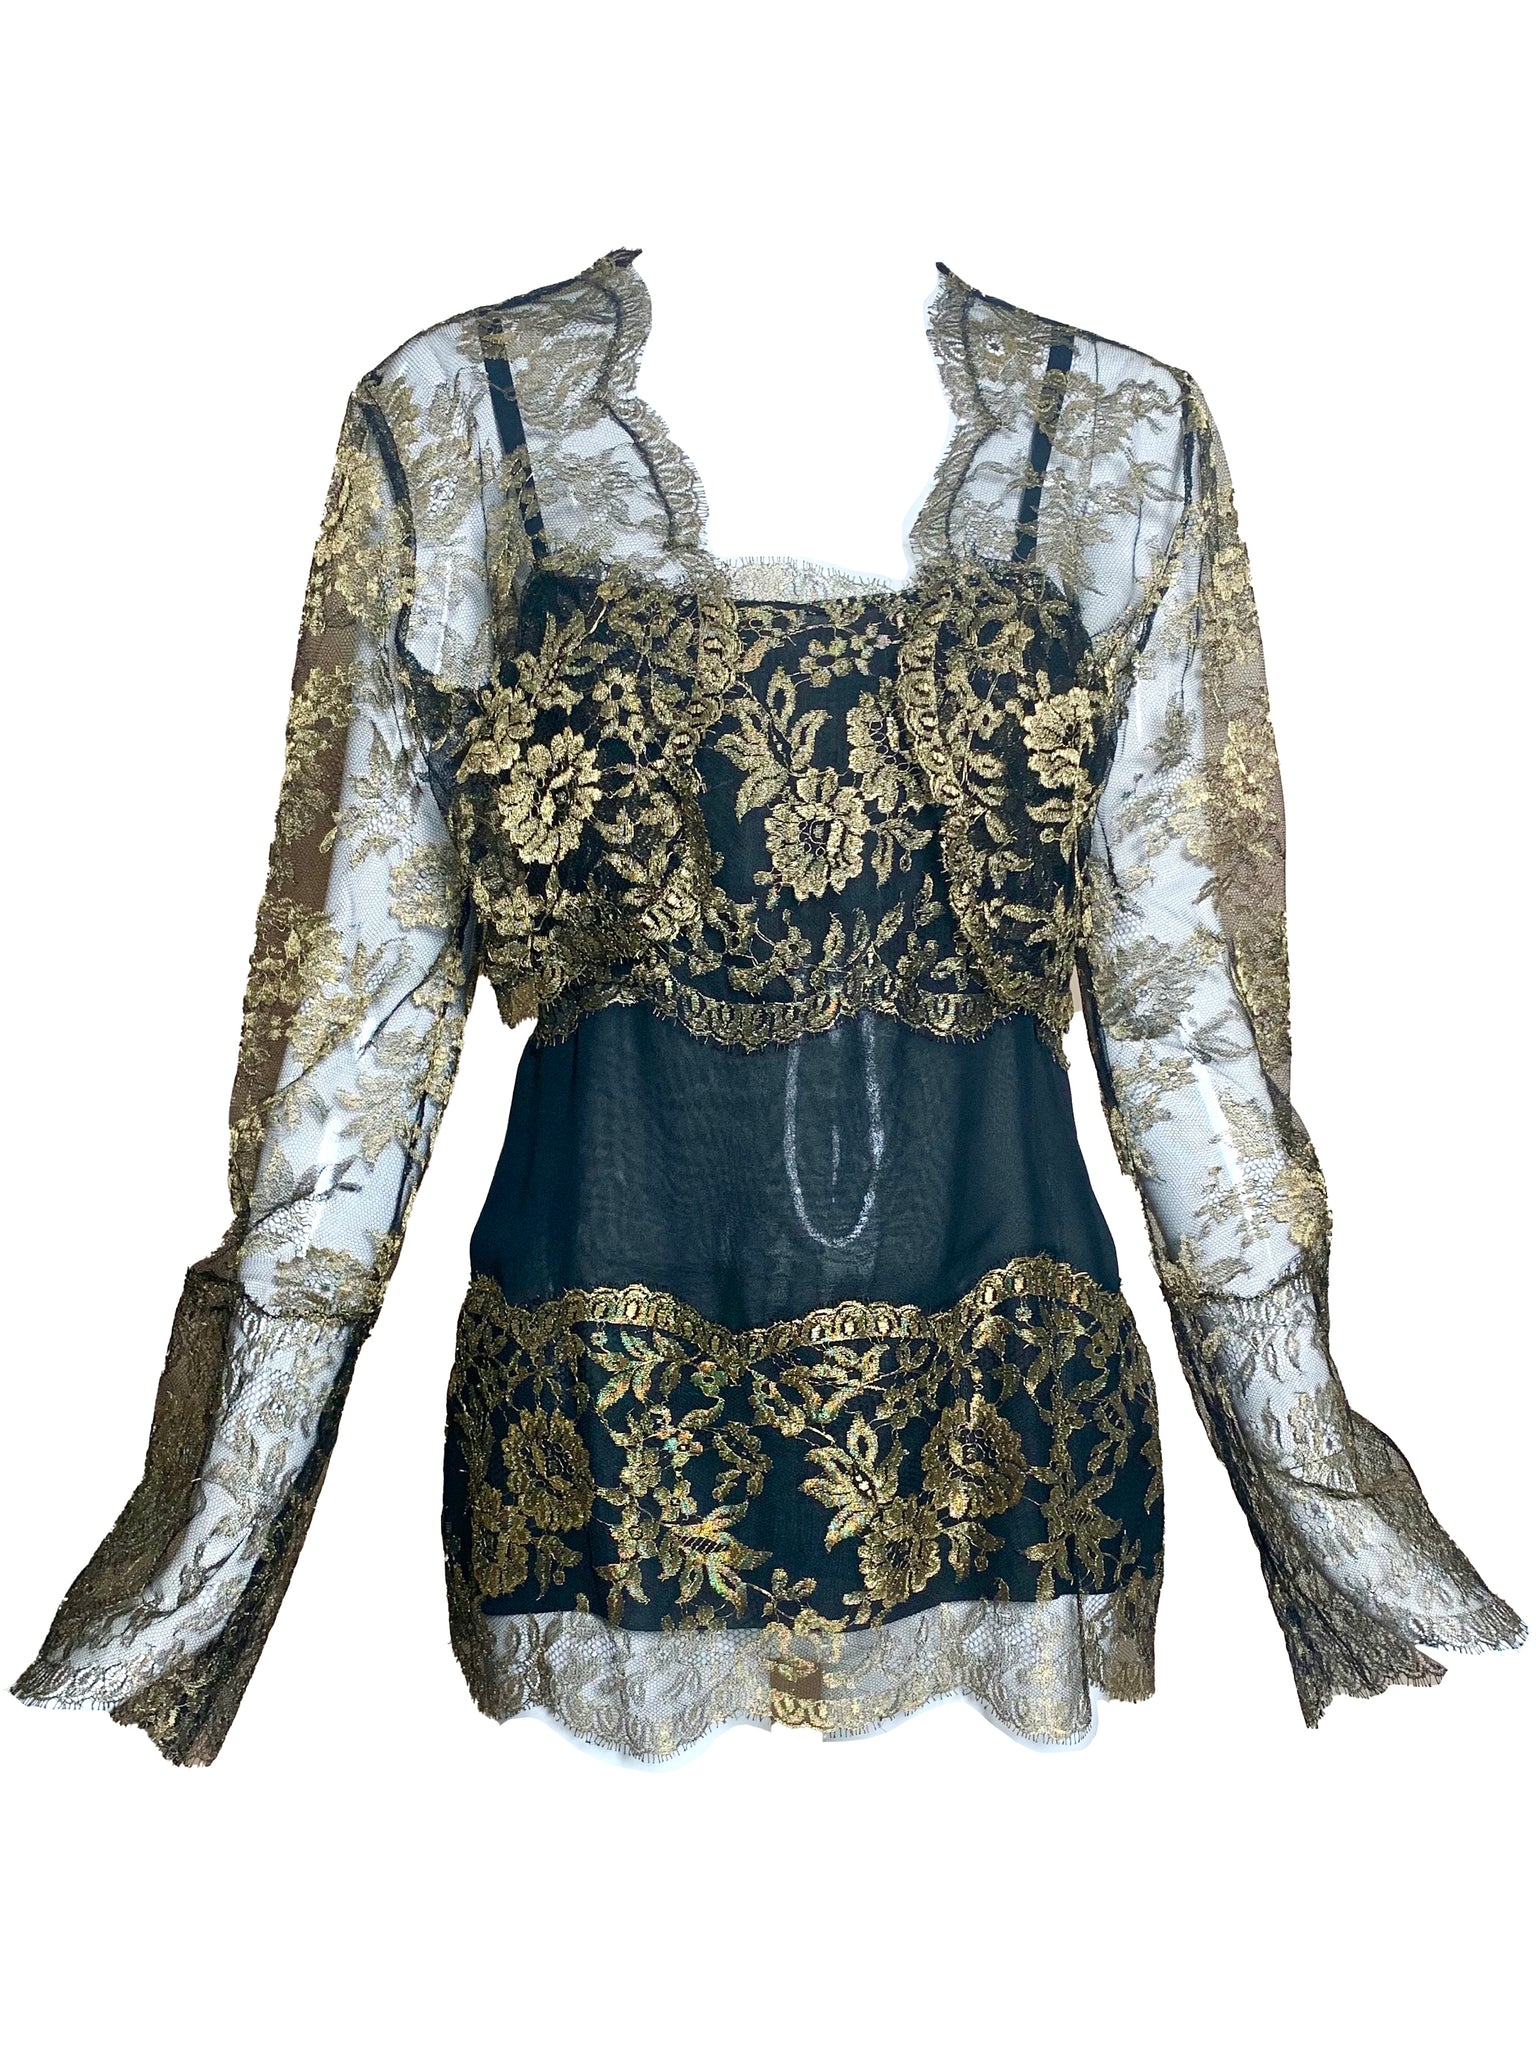 80s Gold Lame Lace Evening Blouse with Matching Cropped Jacket FRONT 2 of 5